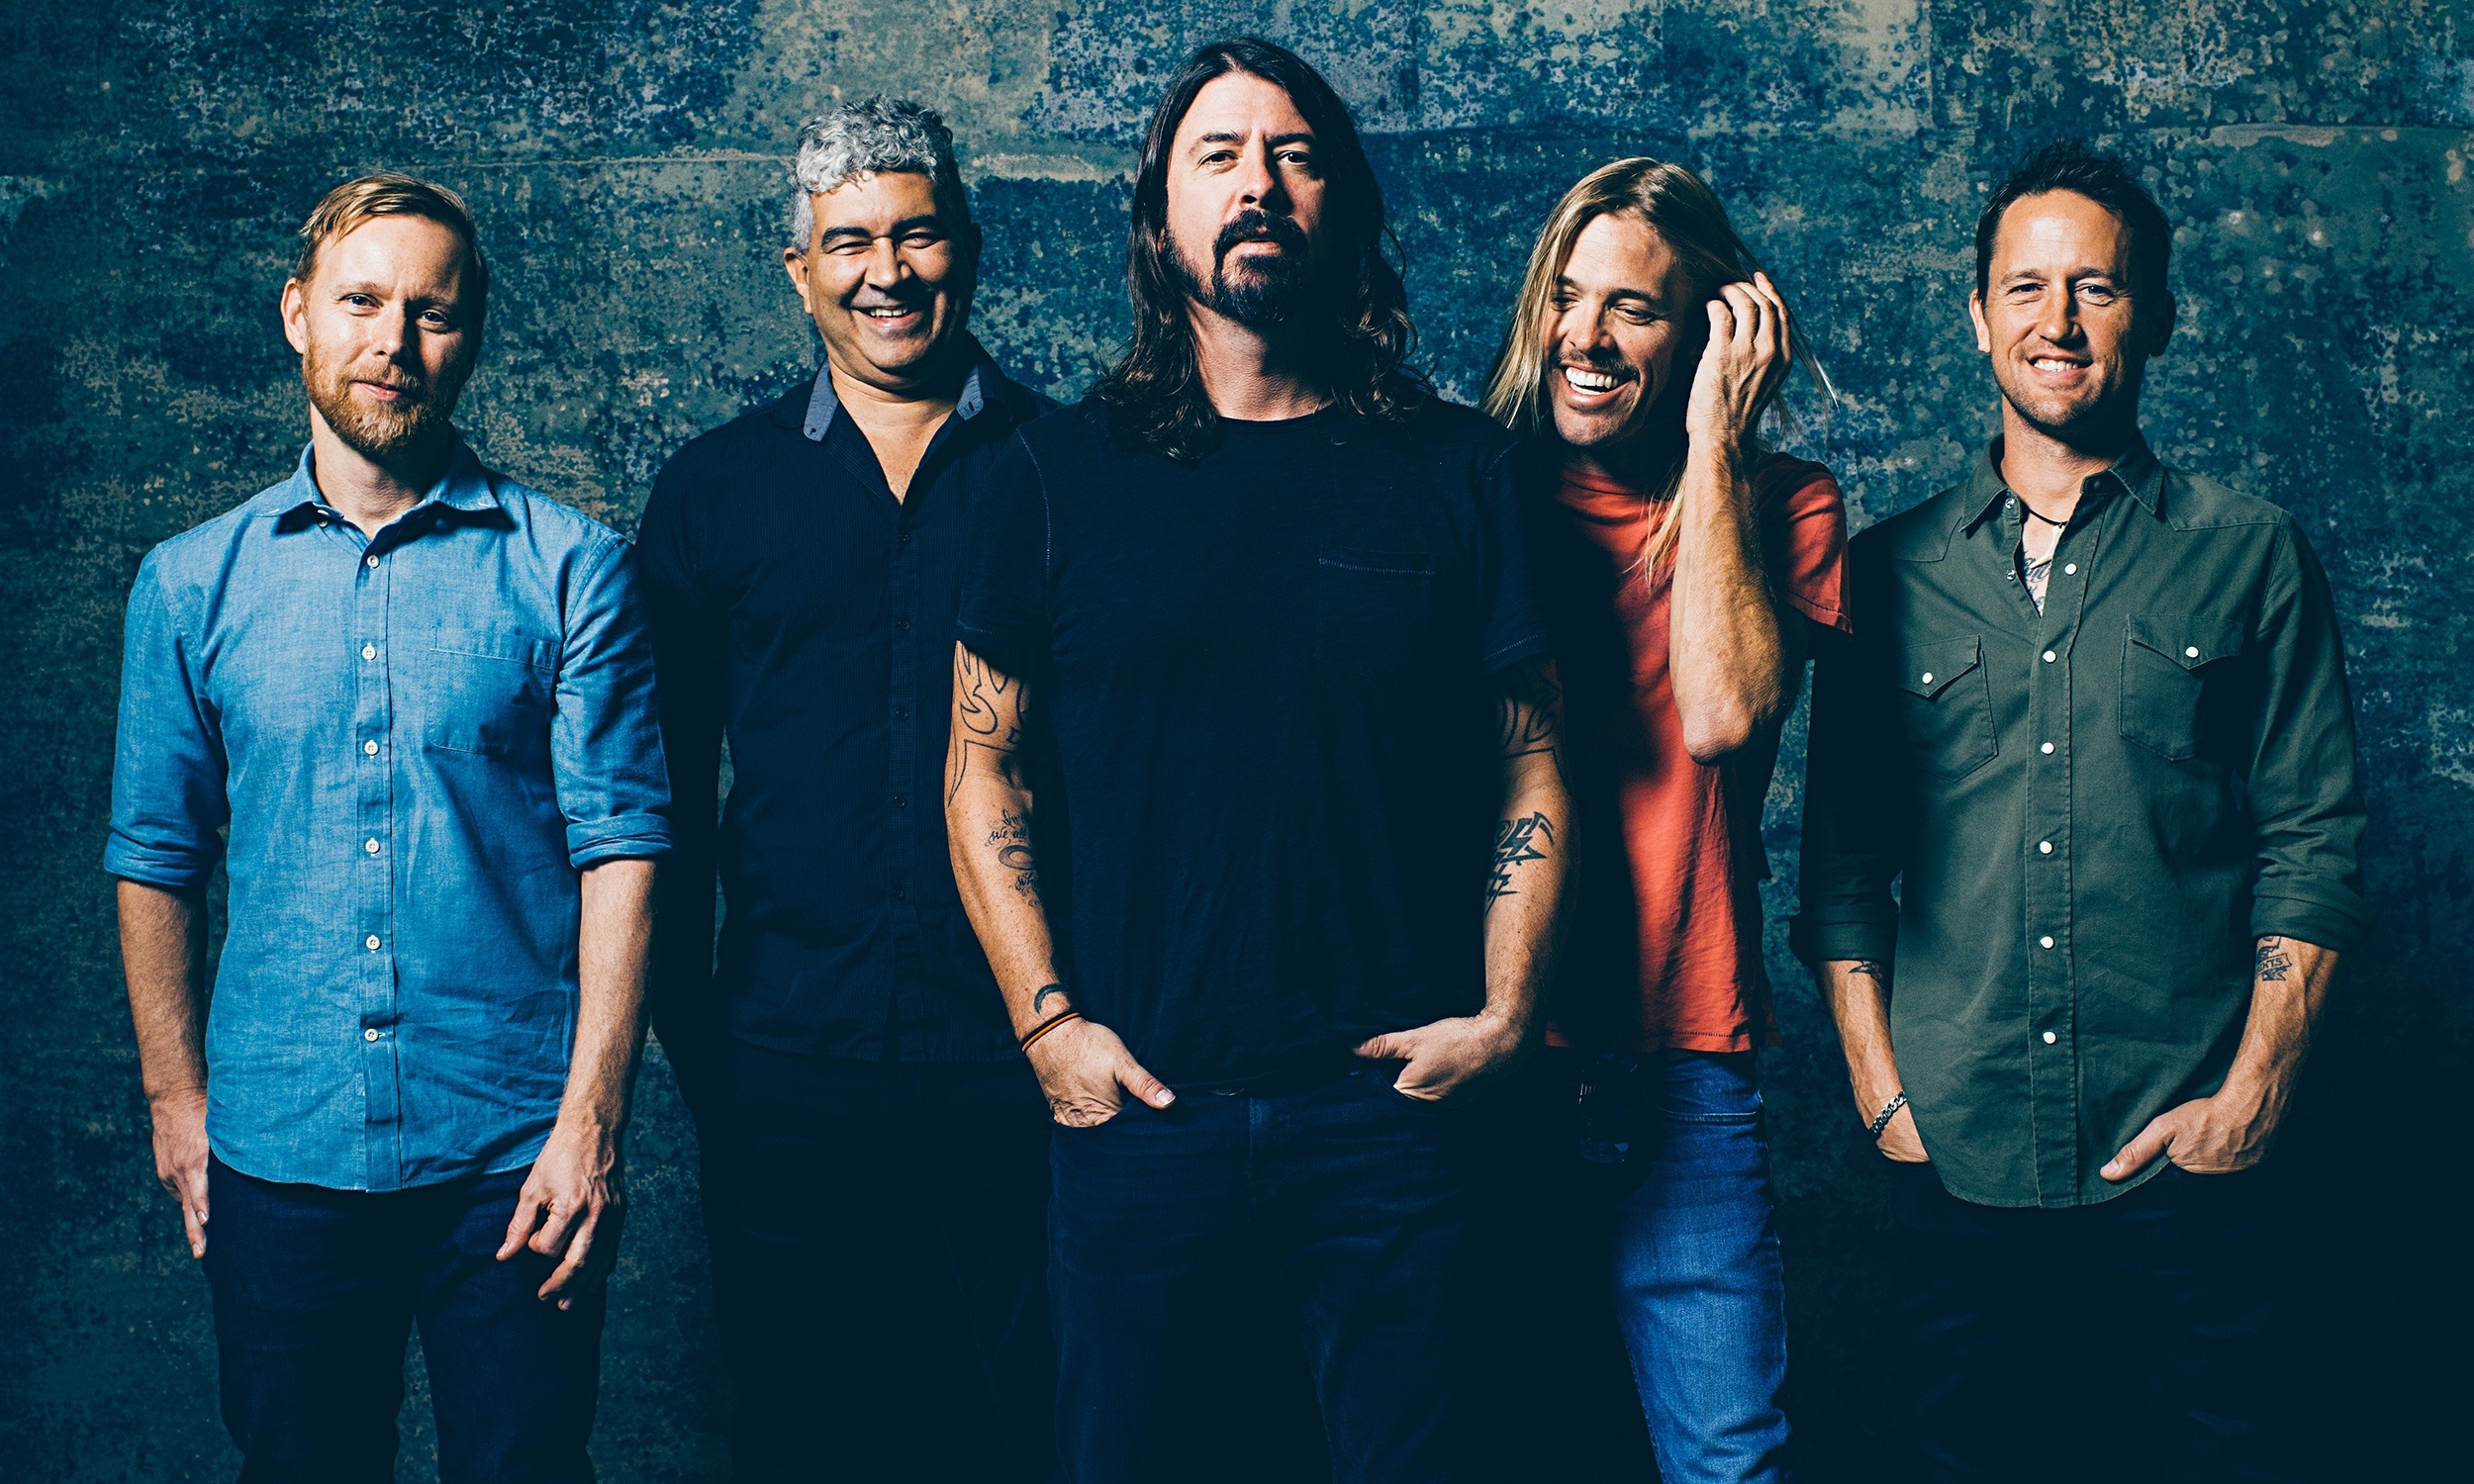 Foo Fighters: Known for hits songs like “Everlong,” “Learn to Fly” and “All My Life”. 2500x1500 HD Wallpaper.